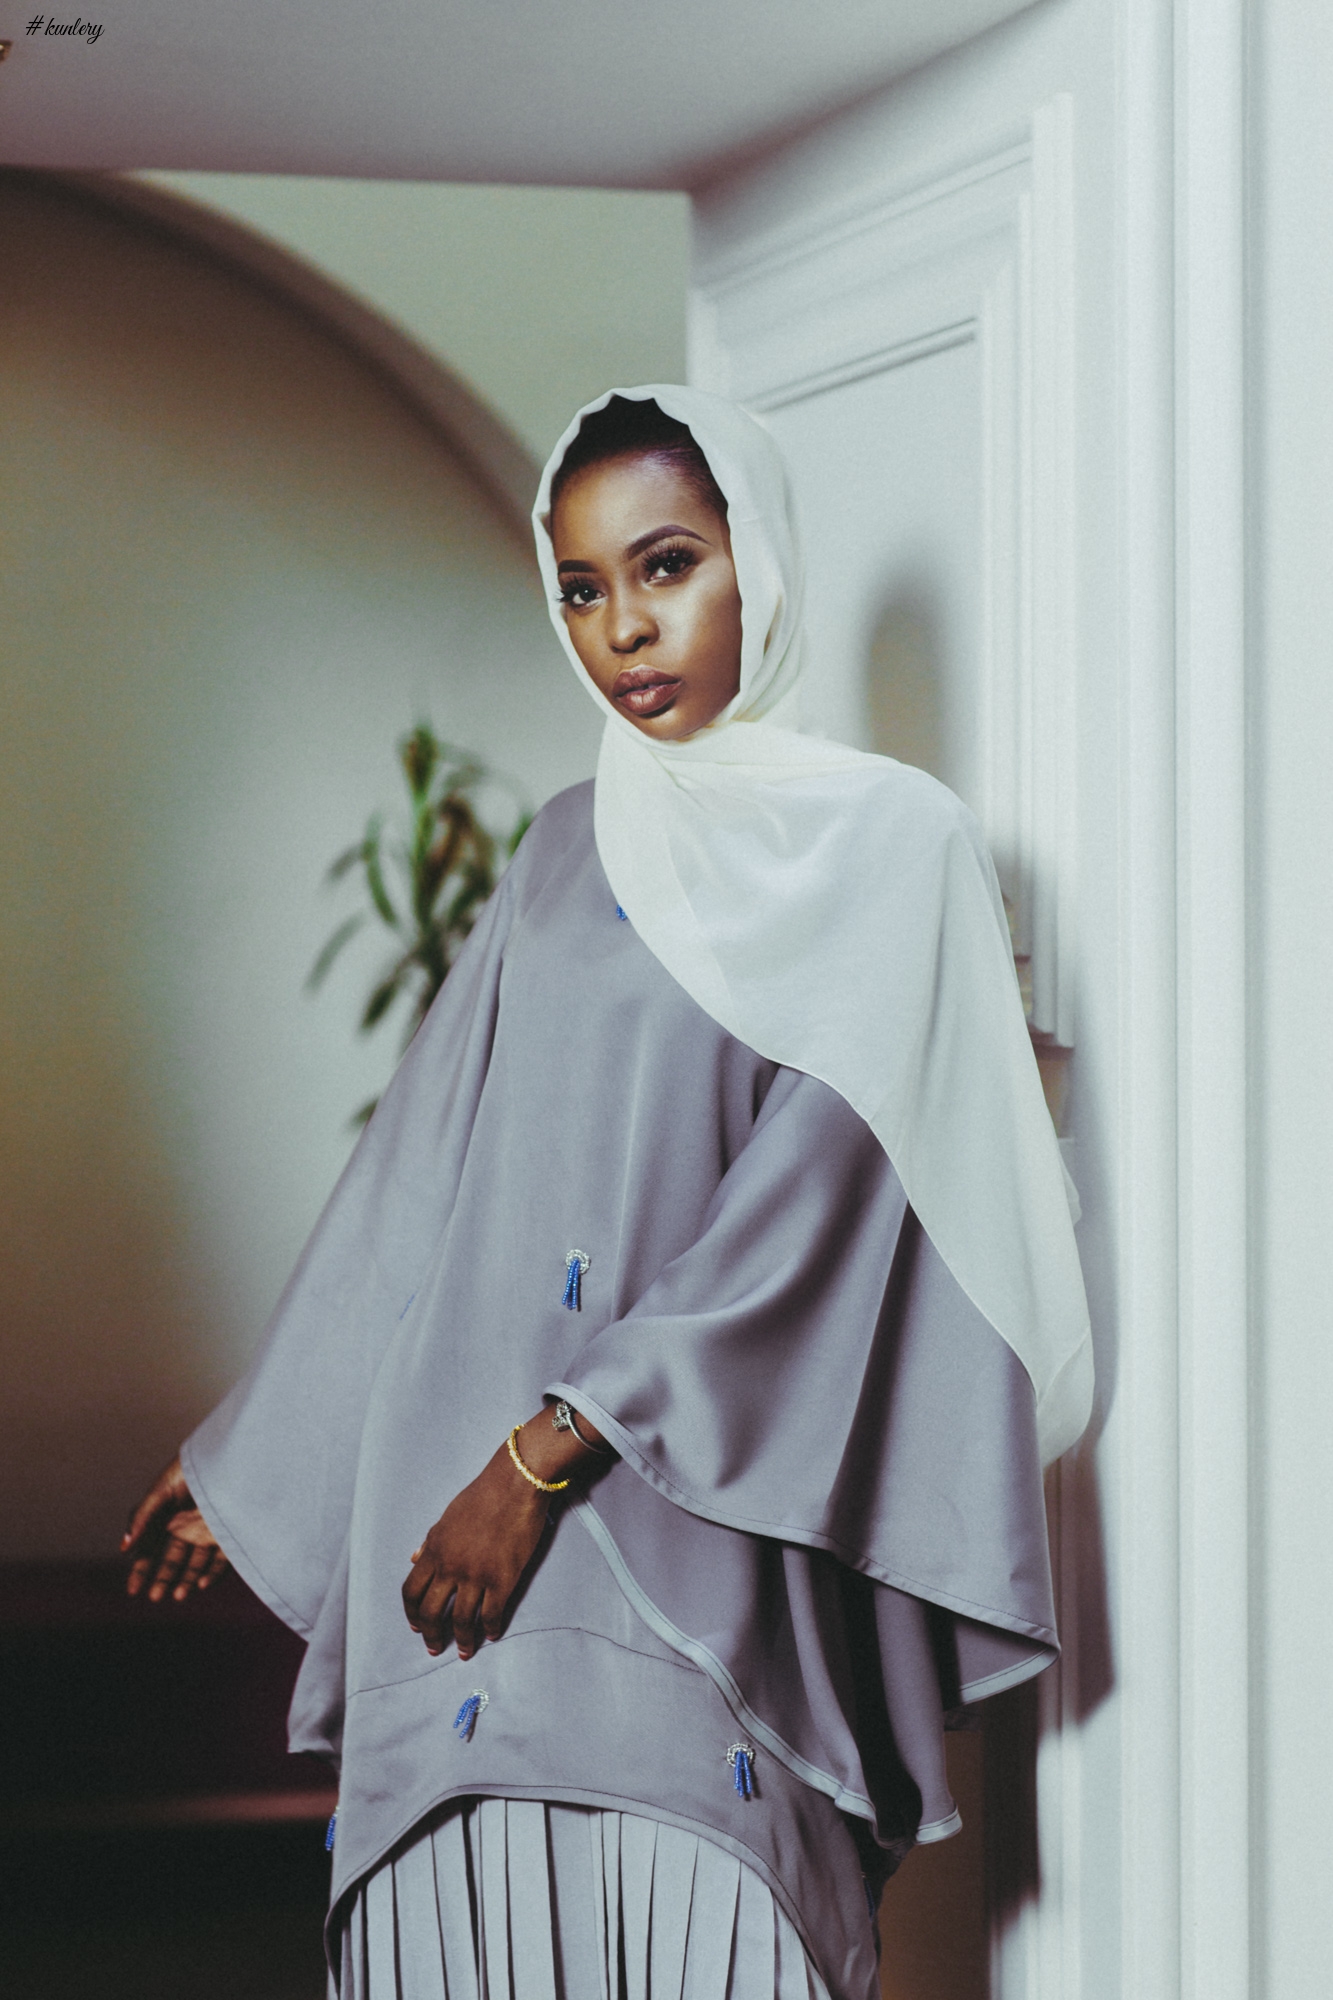 Womenswear Brand Amnas Releases 2018 Collection In Anticipation Of Ramadan